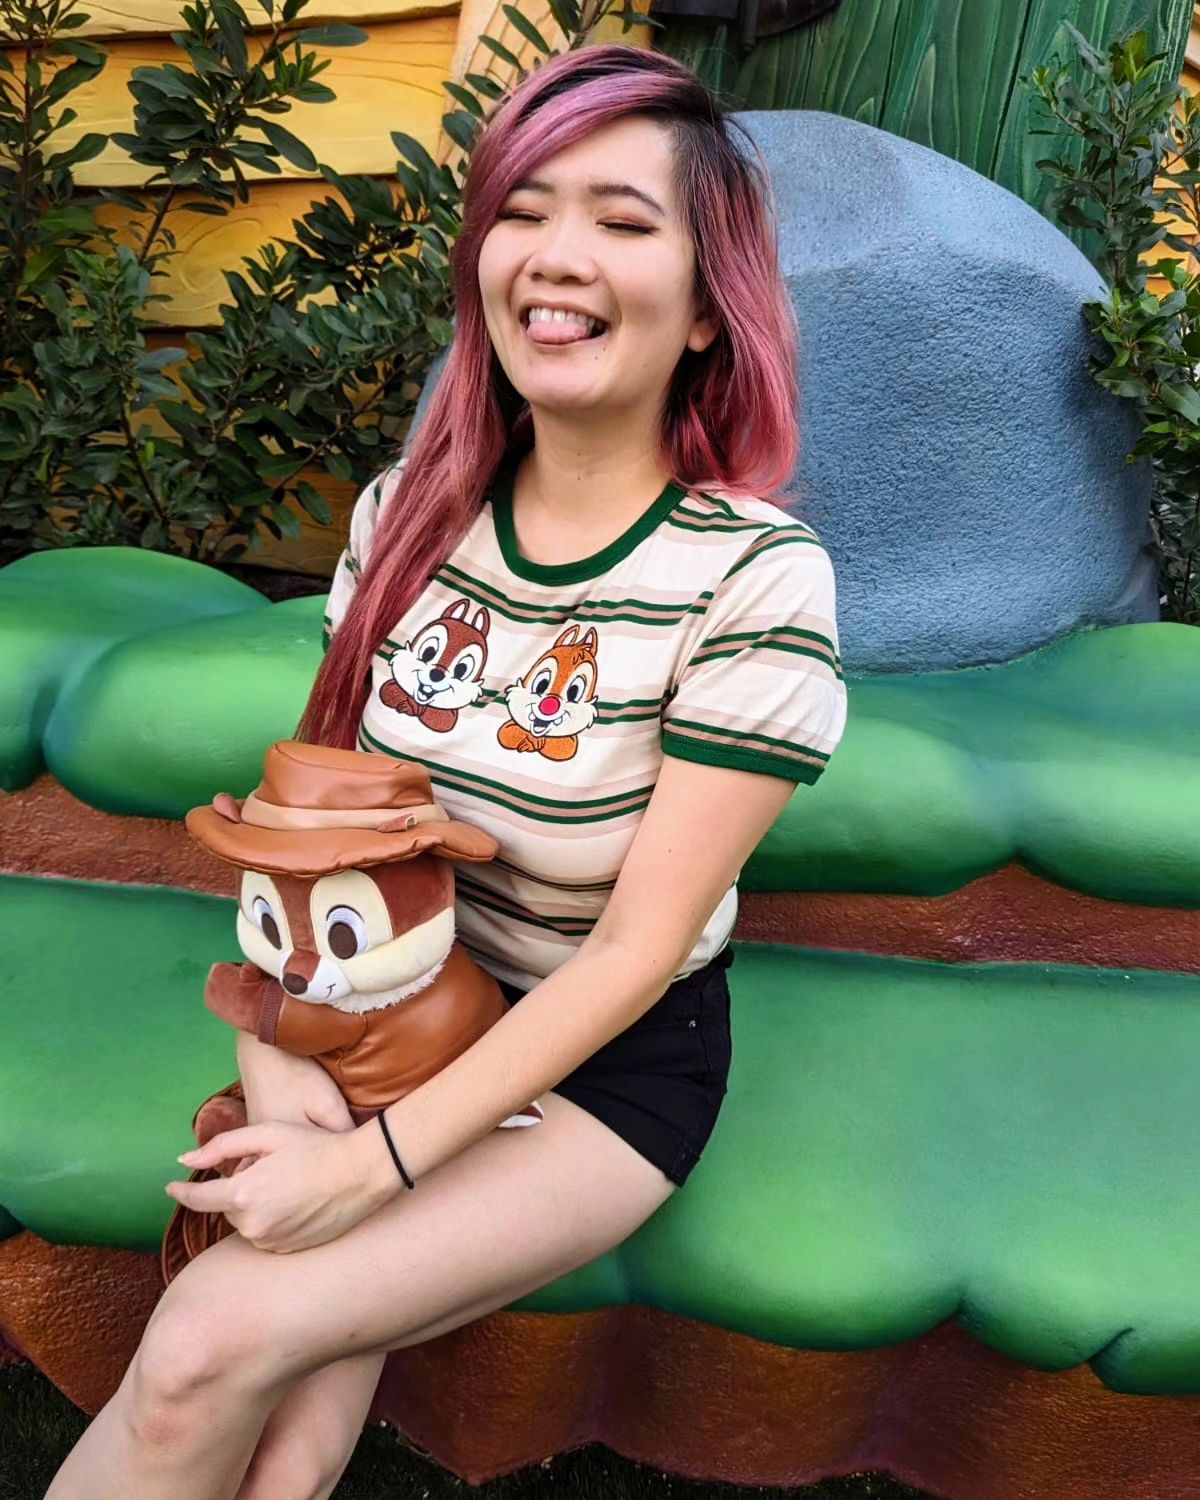 Now I have the cutest shirt to wear to Disneyland 🥺🐿️🐿️❤️ also peep my adorable Chip backpack 🥺👉👈💕 Some dude thought it was my kid when I had it on my chest 😩😂

#sponsoredbyHT #HTFxChipandDale